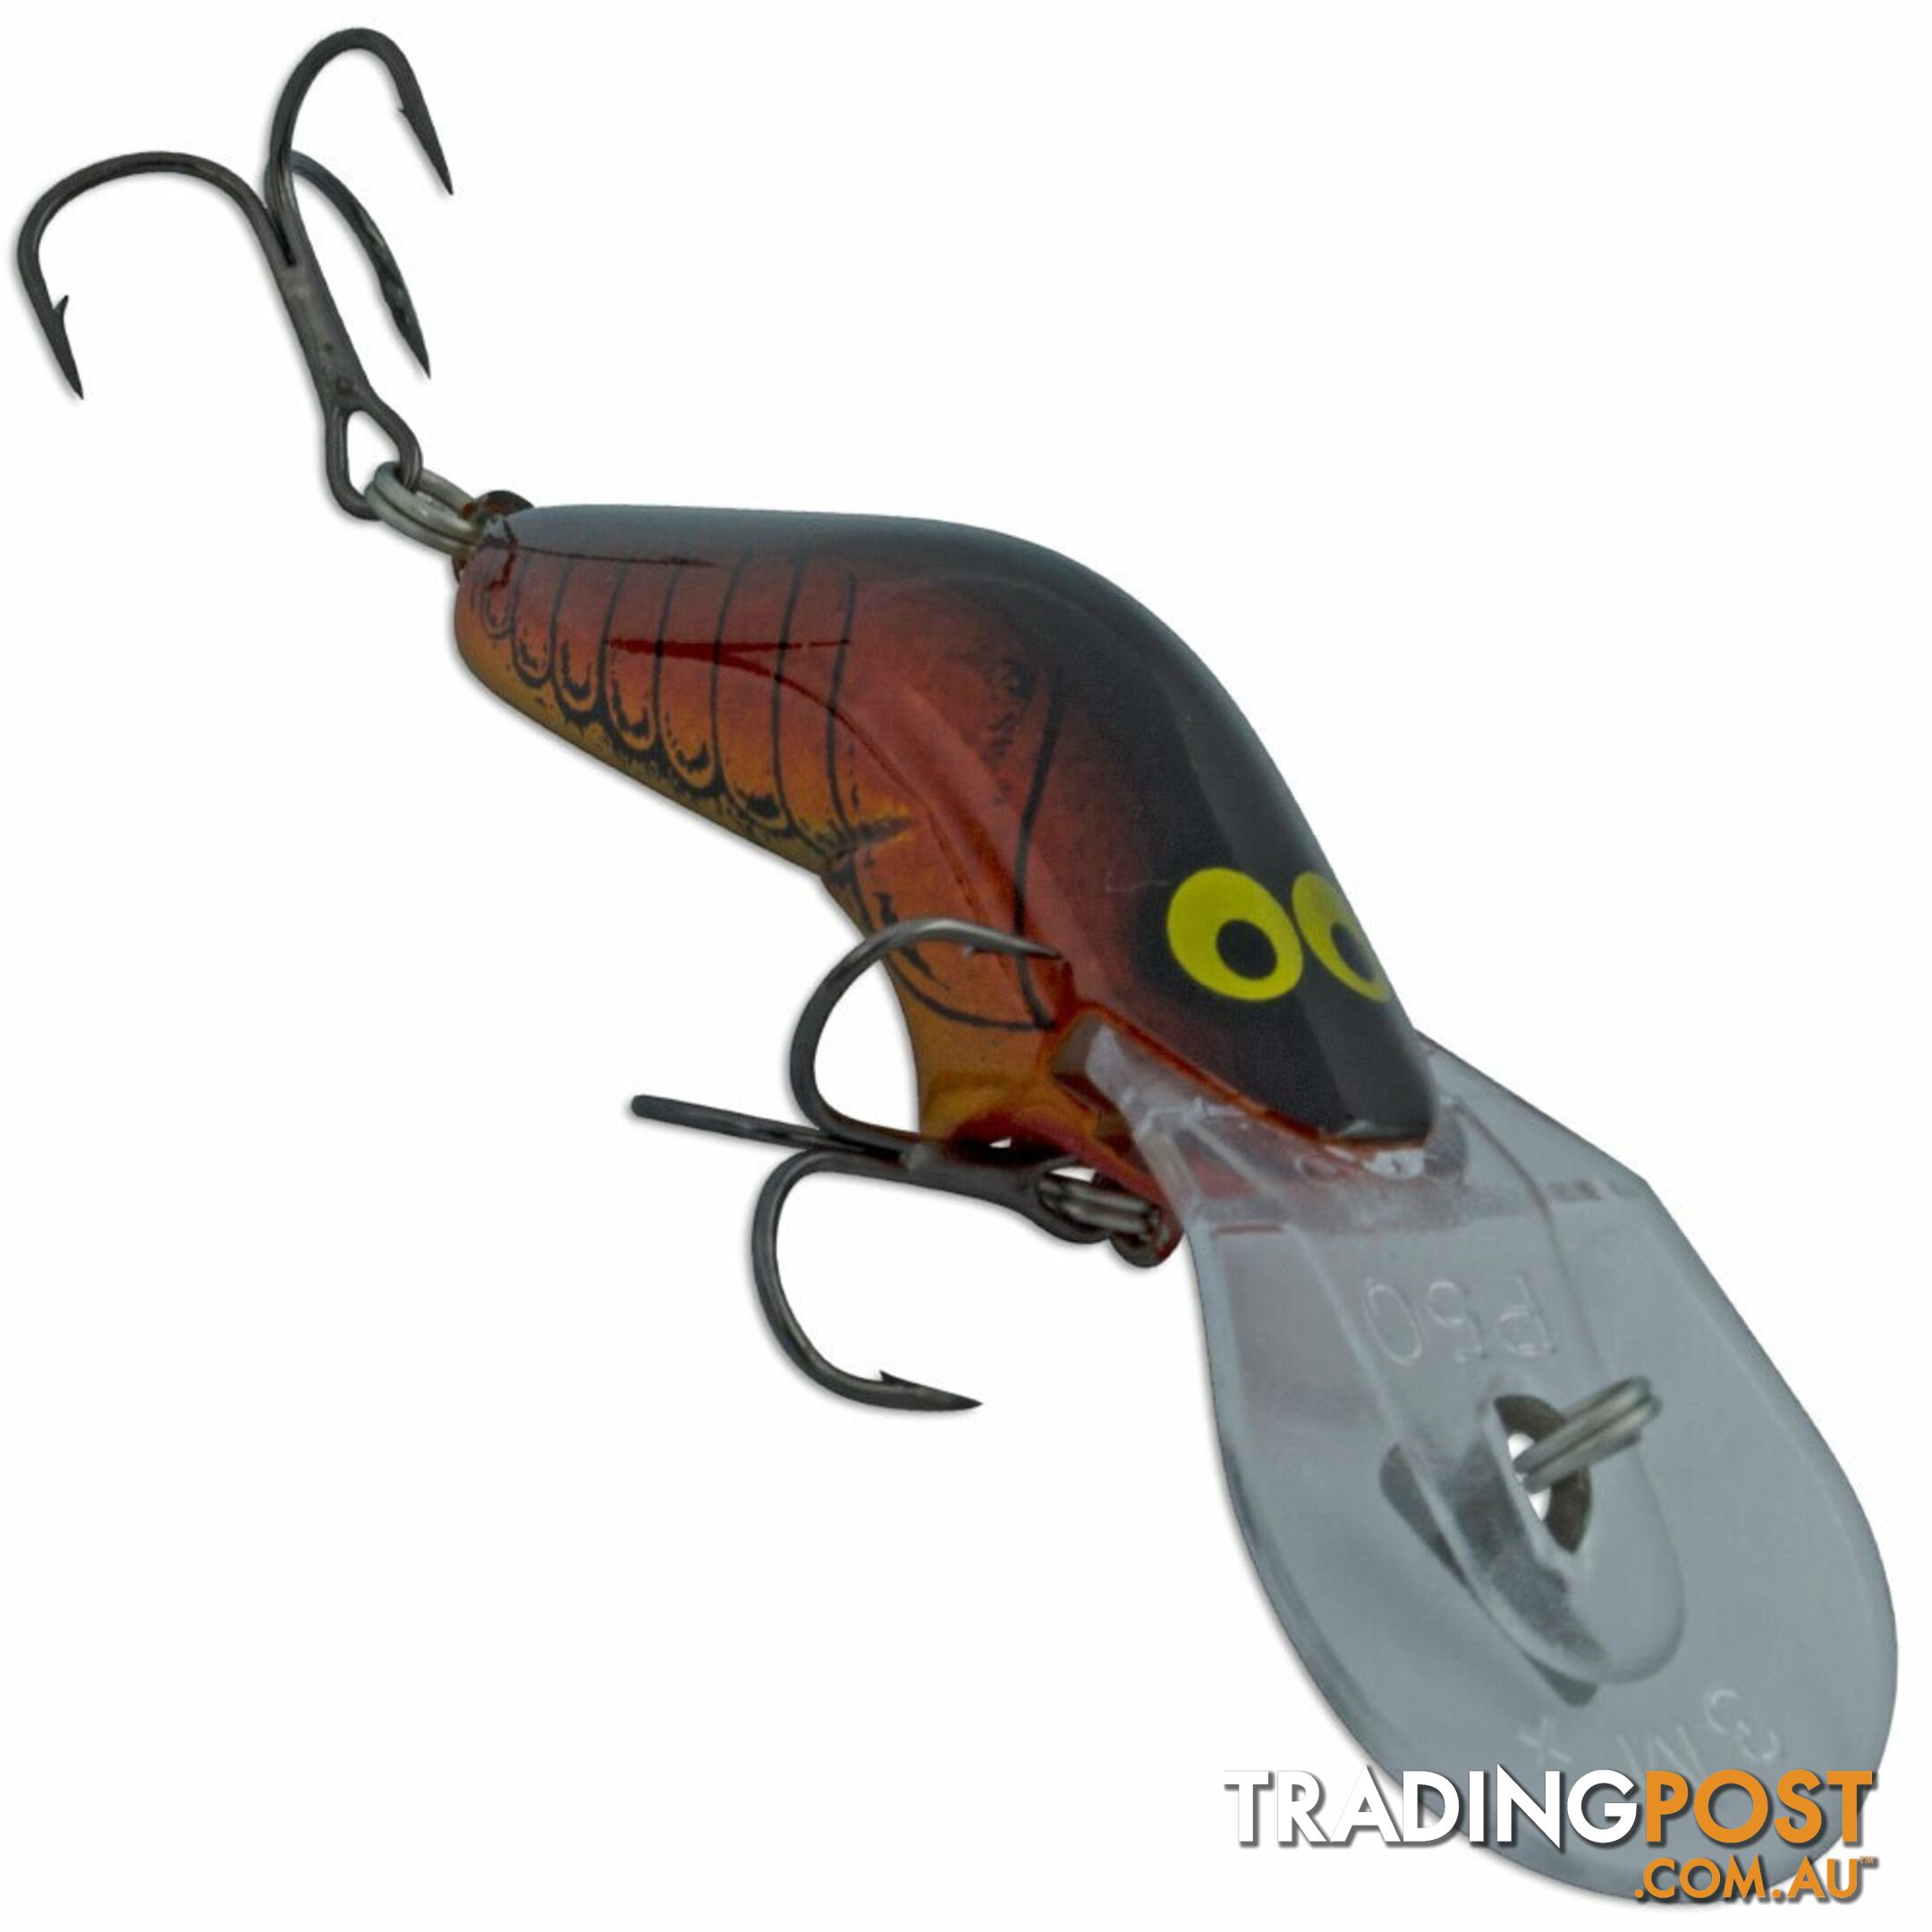 Halco - RMG Poltergeist Fishing Lure 50mm - Poltergeist 50 - Halco Lures and Fishing Tackle